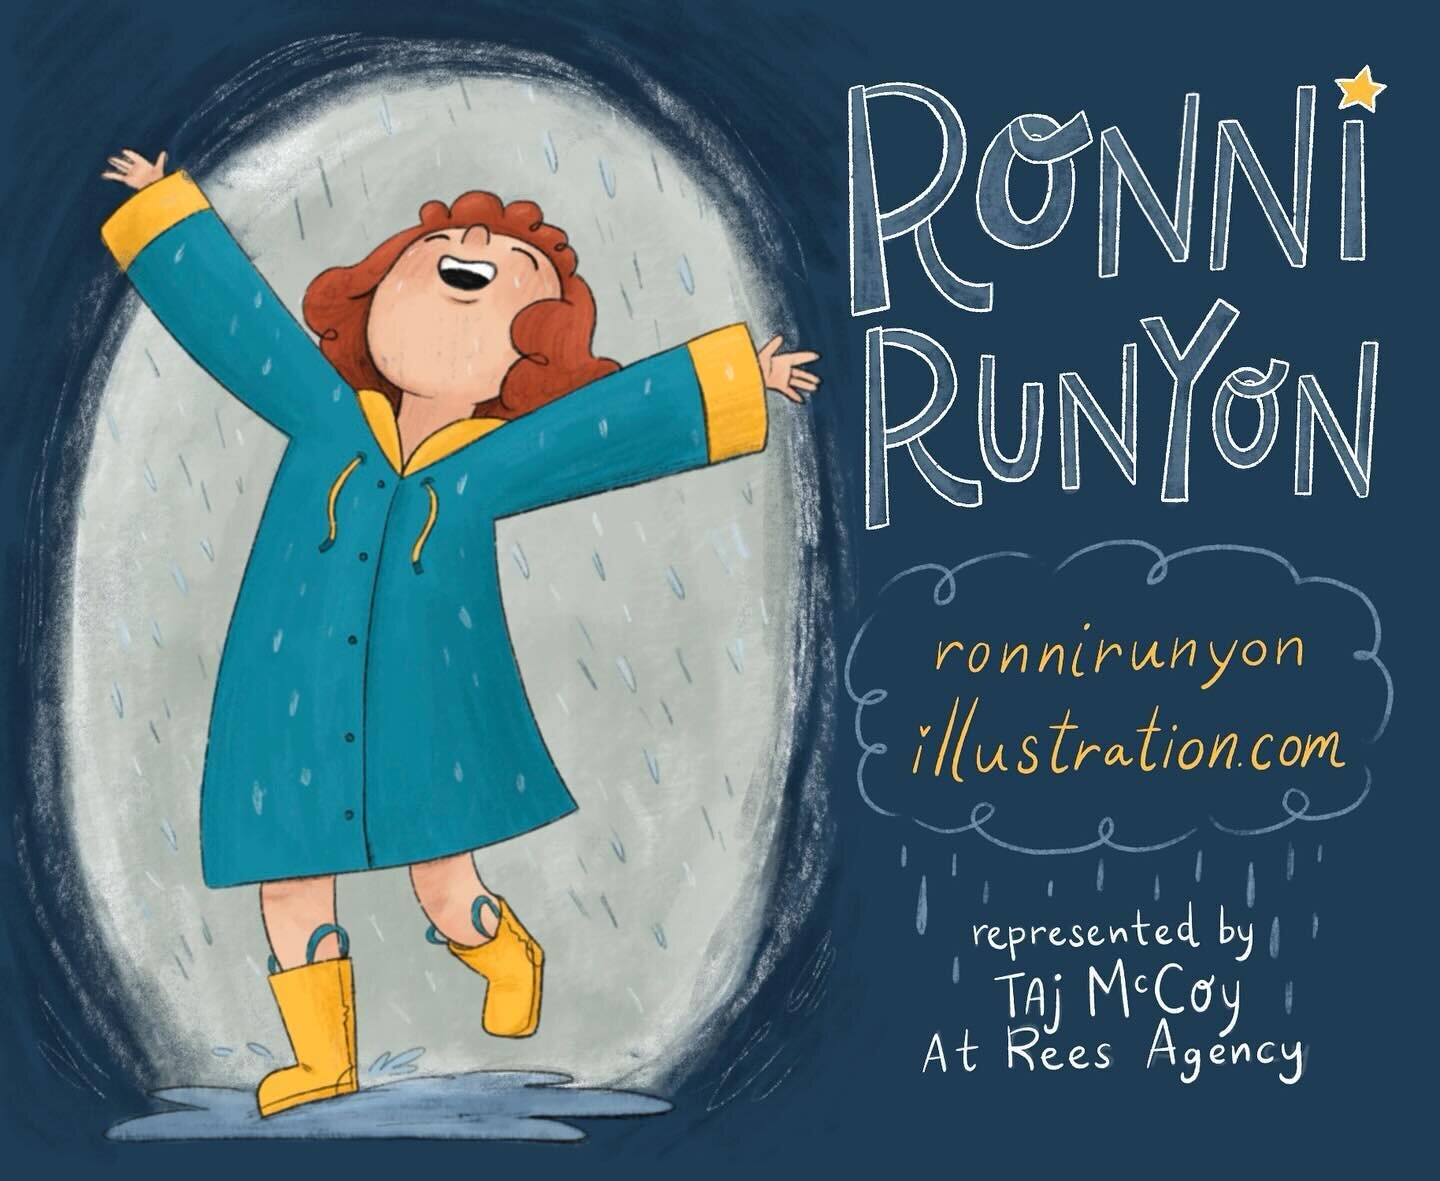 #Kidlitartpostcard April Showers ☂️ ! I'd love to work on a book surrounding nature 💕 I'm available for picture books, middle grade, and other fun projects you may have! I'm represented by Taj McCoy at Rees Agency. Check out more of my work at ronni